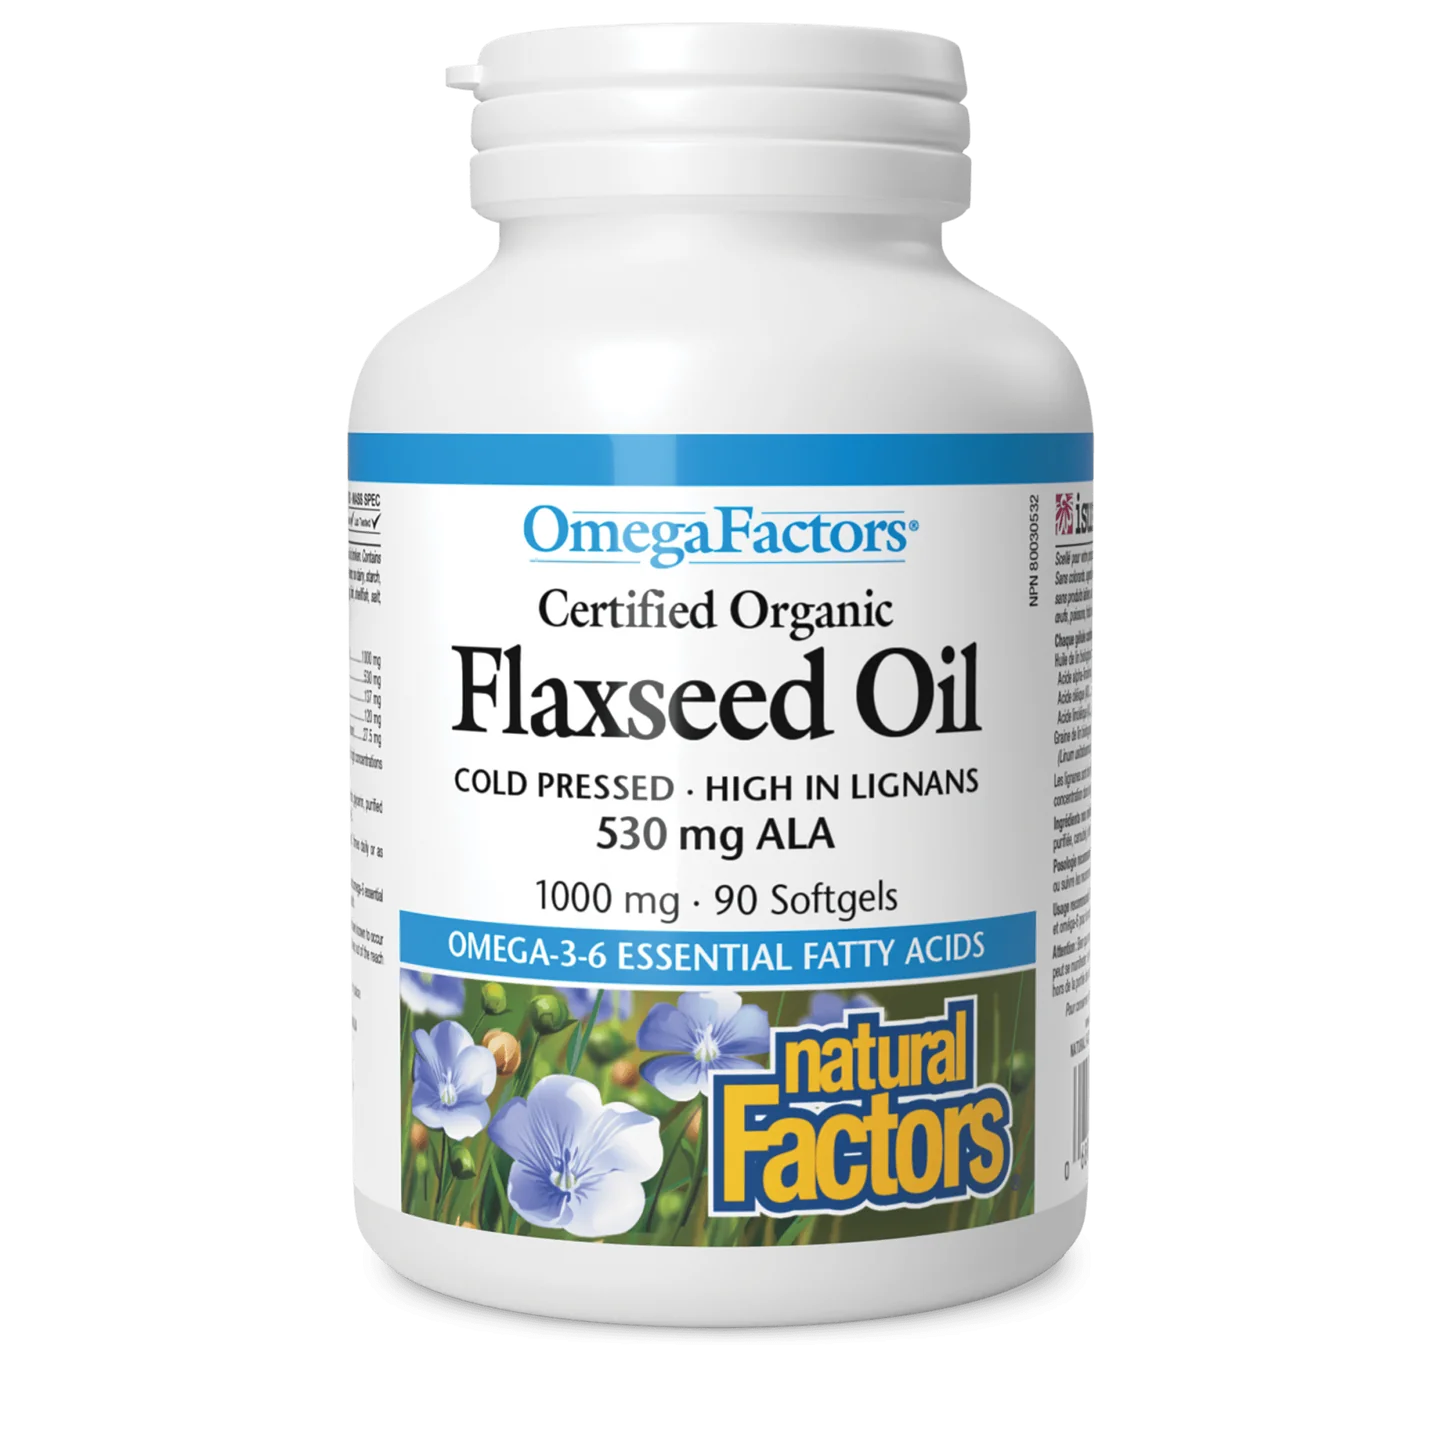 Natural Factors Flaxseed Oil Certified Organic 1000 mg (90 softgels)